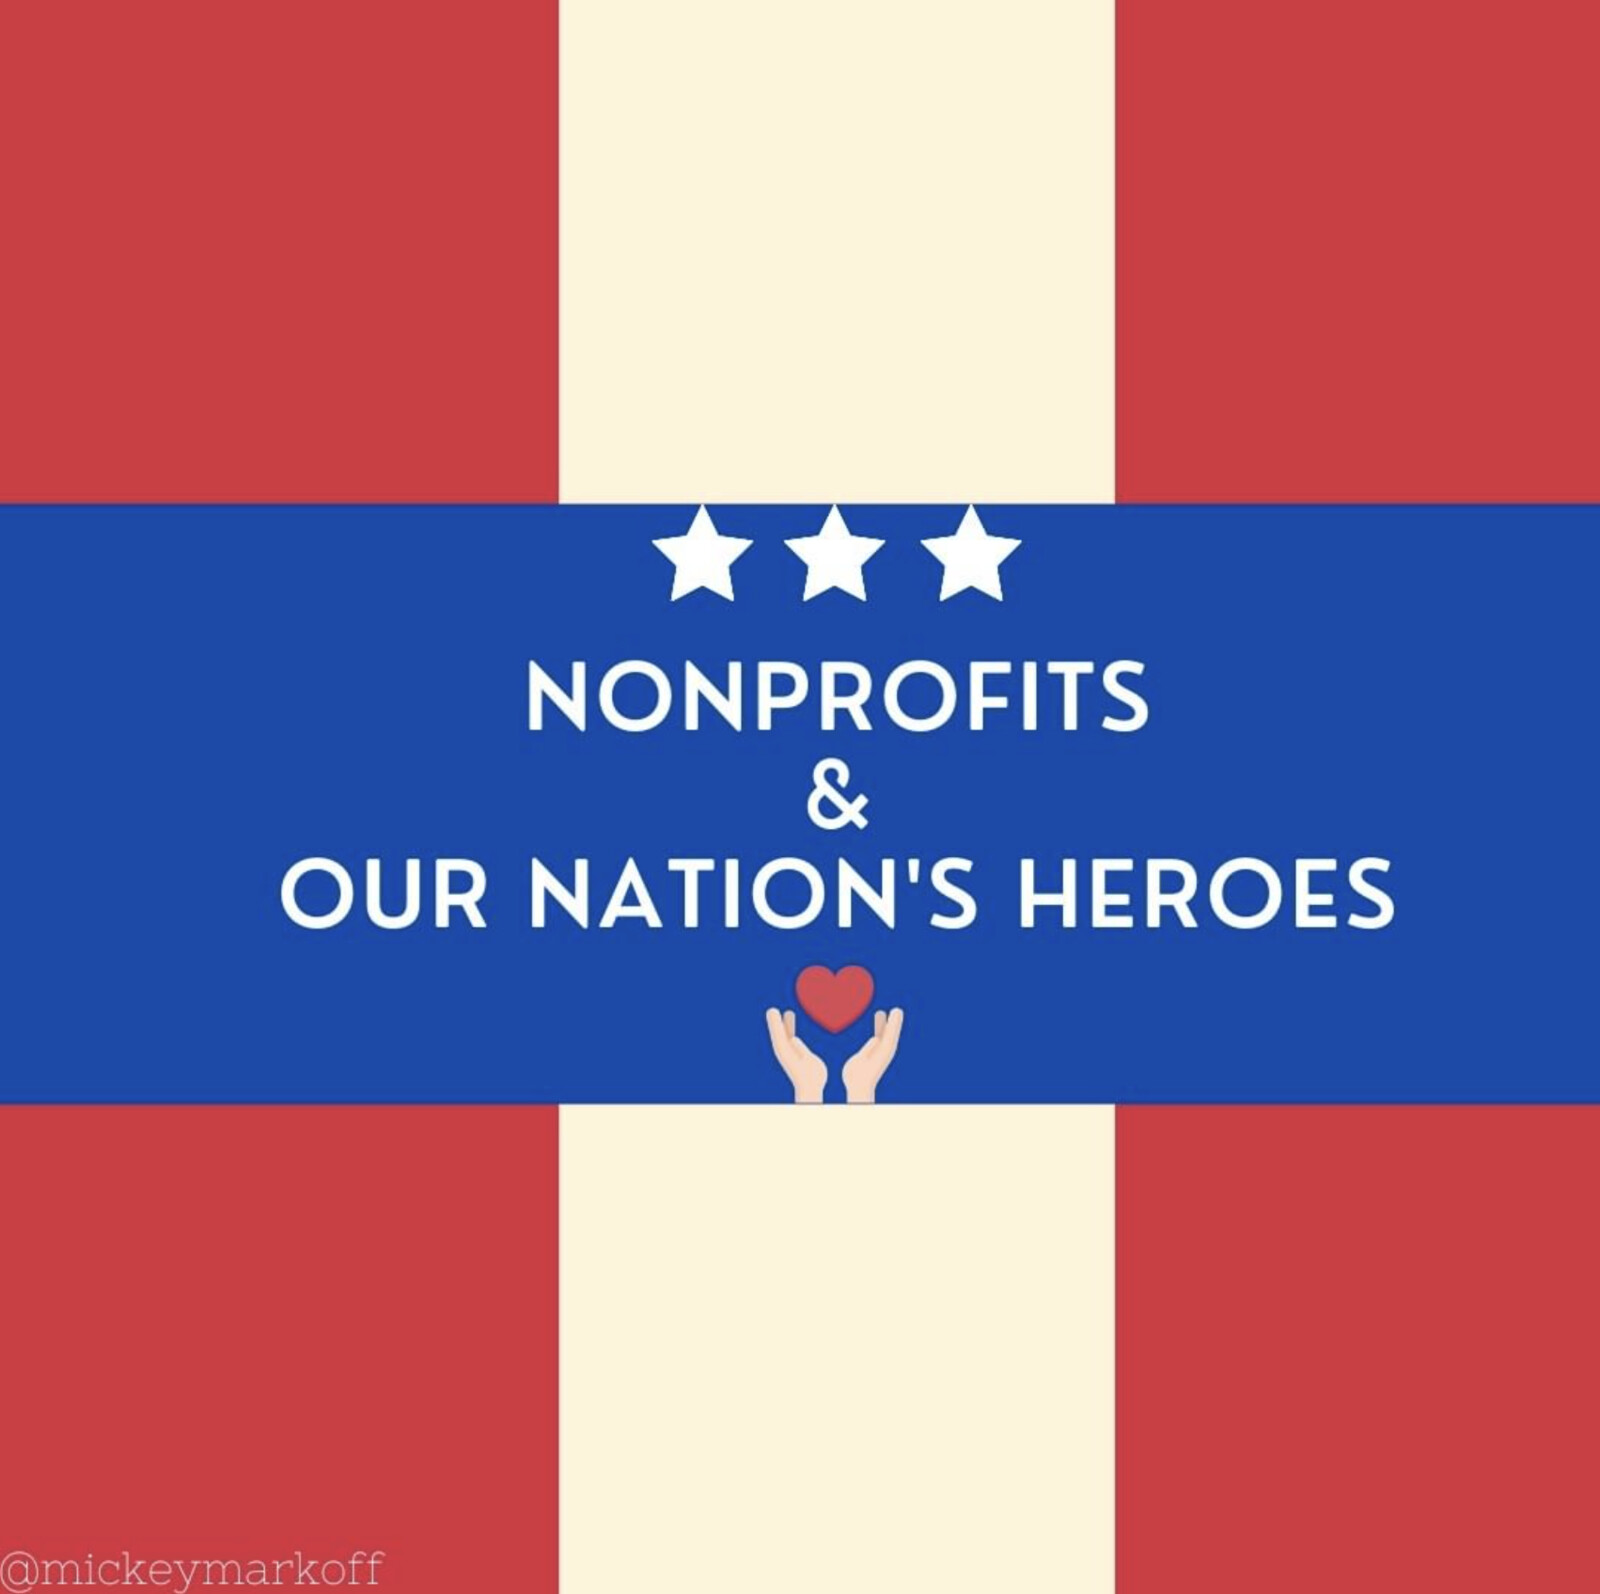 Mickey Markoff - Air and Sea Show Executive Producer - “Nonprofits &amp; Our Nation's Heroes"